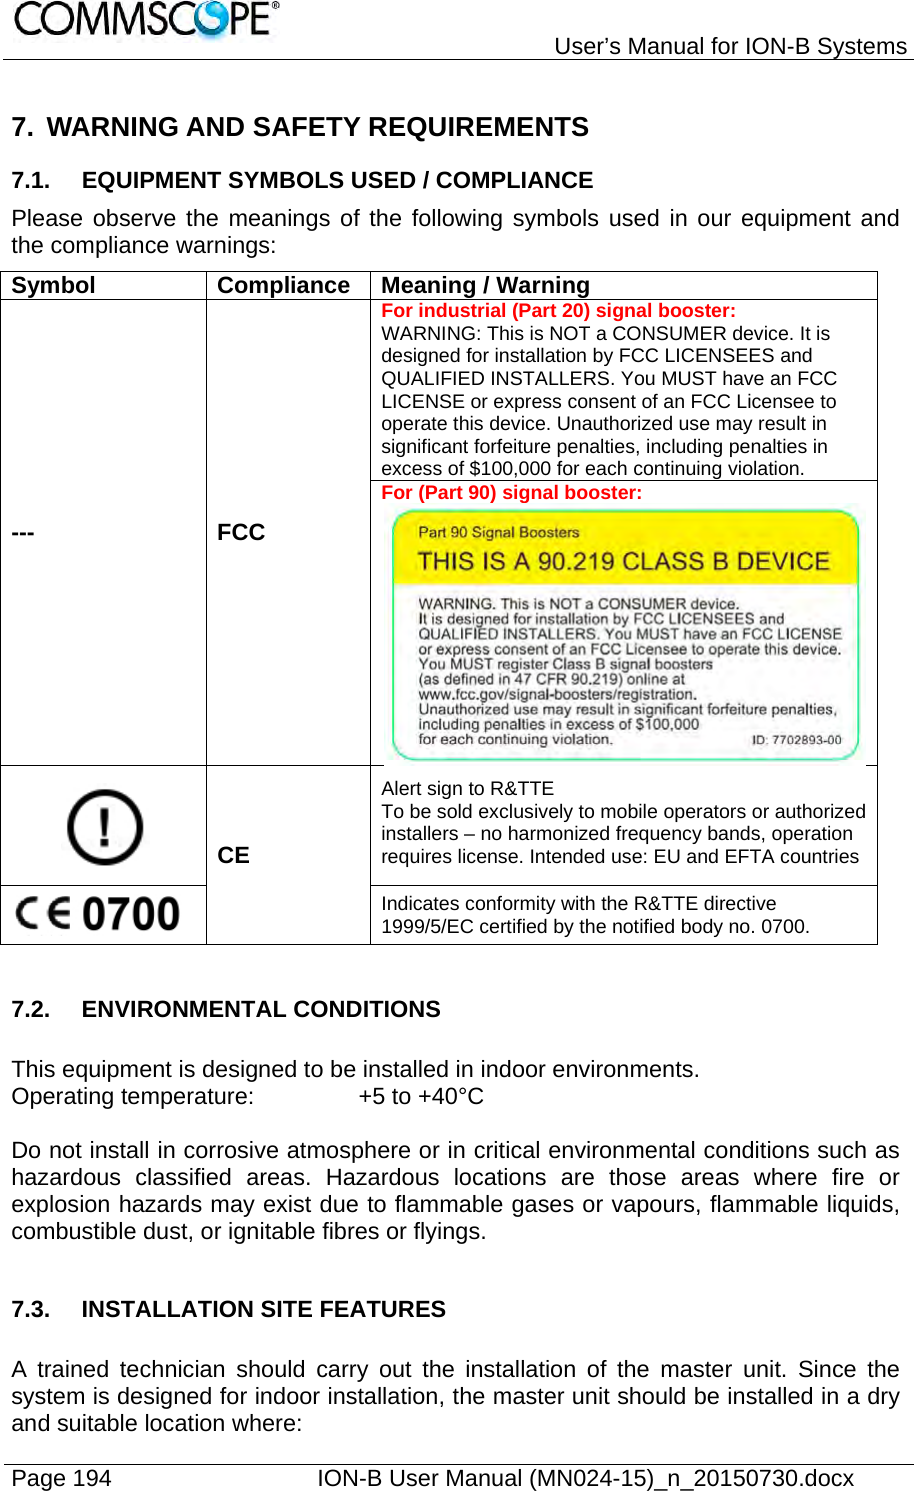   User’s Manual for ION-B Systems Page 194    ION-B User Manual (MN024-15)_n_20150730.docx  7. WARNING AND SAFETY REQUIREMENTS 7.1.  EQUIPMENT SYMBOLS USED / COMPLIANCE Please observe the meanings of the following symbols used in our equipment and the compliance warnings: Symbol Compliance Meaning / Warning --- FCC For industrial (Part 20) signal booster: WARNING: This is NOT a CONSUMER device. It is designed for installation by FCC LICENSEES and QUALIFIED INSTALLERS. You MUST have an FCC LICENSE or express consent of an FCC Licensee to operate this device. Unauthorized use may result in significant forfeiture penalties, including penalties in excess of $100,000 for each continuing violation. For (Part 90) signal booster: CE Alert sign to R&amp;TTE To be sold exclusively to mobile operators or authorized installers – no harmonized frequency bands, operation requires license. Intended use: EU and EFTA countries  Indicates conformity with the R&amp;TTE directive 1999/5/EC certified by the notified body no. 0700.  7.2. ENVIRONMENTAL CONDITIONS  This equipment is designed to be installed in indoor environments. Operating temperature:     +5 to +40°C  Do not install in corrosive atmosphere or in critical environmental conditions such as hazardous classified areas. Hazardous locations are those areas where fire or explosion hazards may exist due to flammable gases or vapours, flammable liquids, combustible dust, or ignitable fibres or flyings.  7.3.  INSTALLATION SITE FEATURES  A trained technician should carry out the installation of the master unit. Since the system is designed for indoor installation, the master unit should be installed in a dry and suitable location where: 